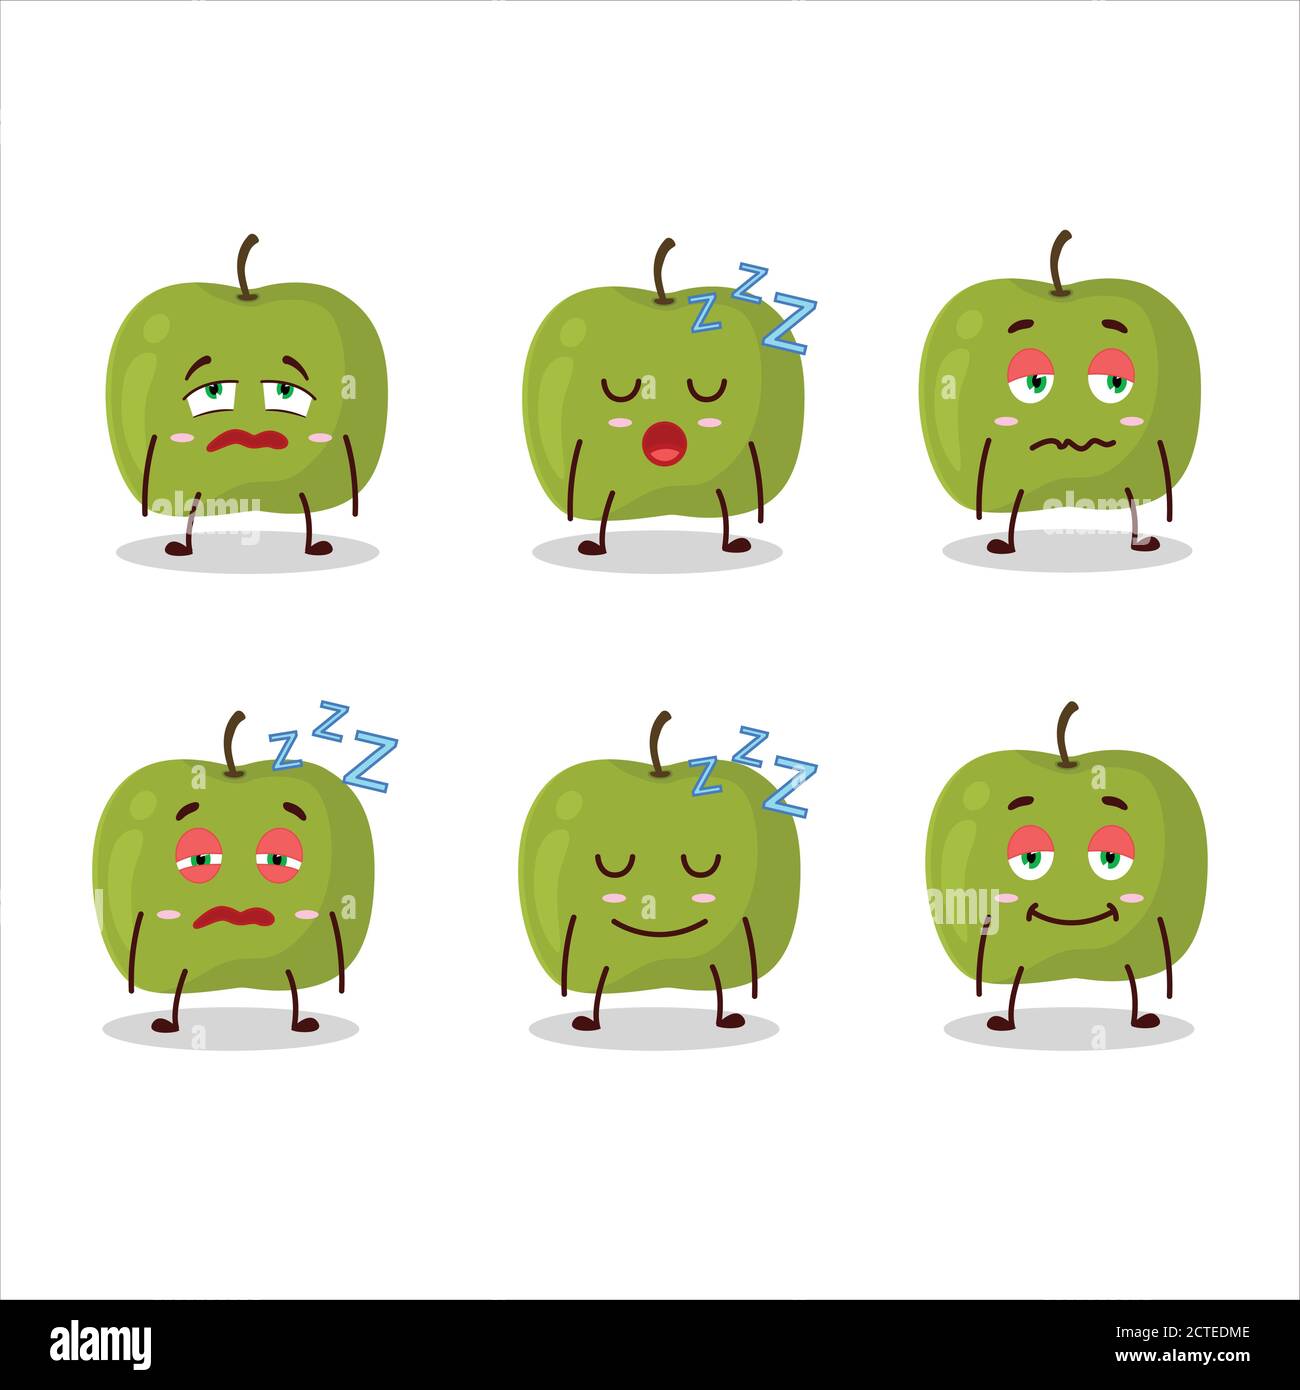 Granny smith apple water droplets Stock Vector Images - Alamy